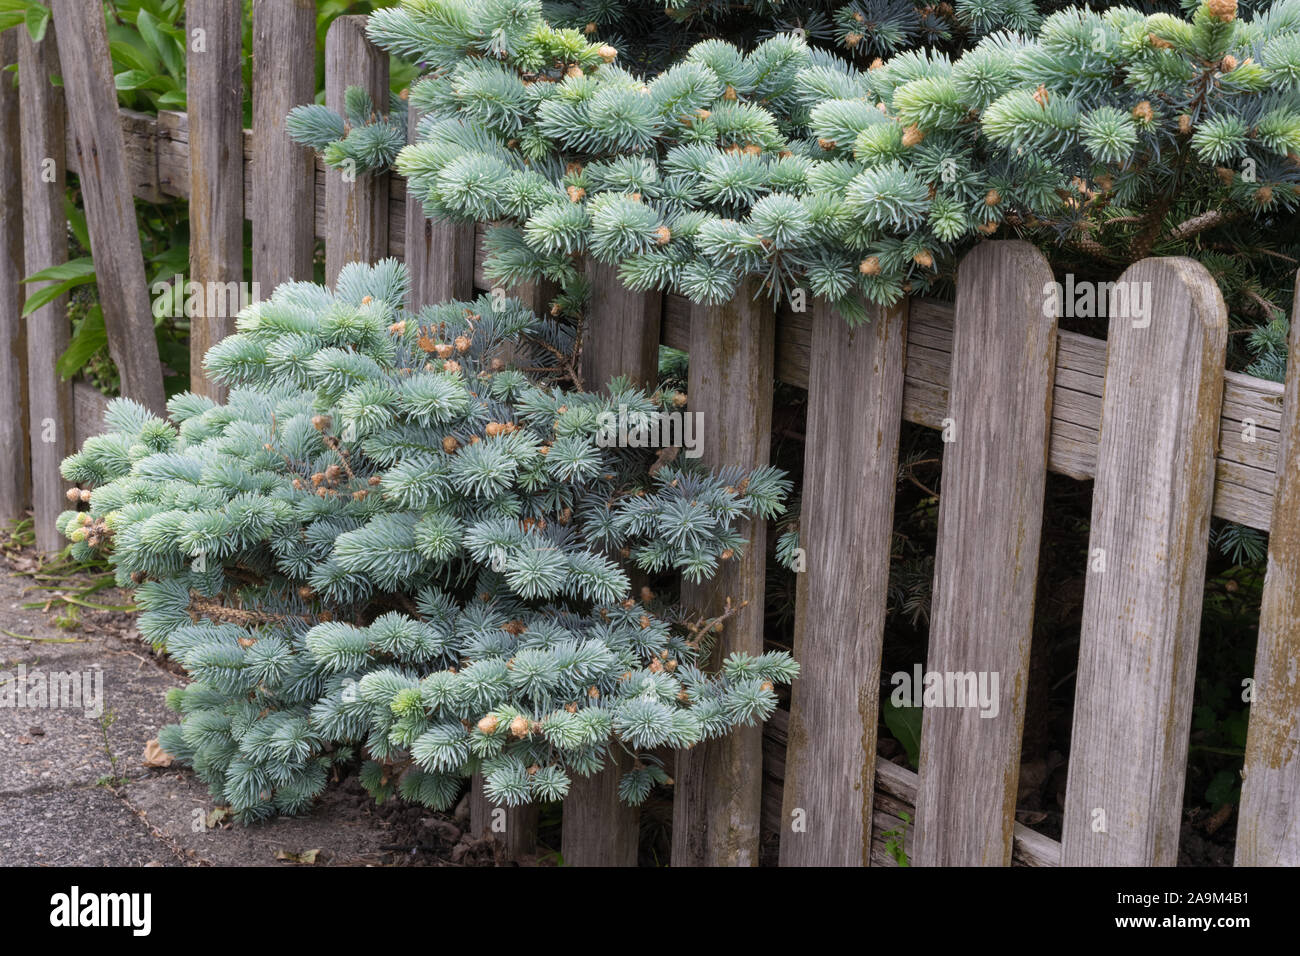 Picea pungens 'Glauca Prostrata' (spreading or creeping dwarf Colorado spruce) growing through a wooden fence in an urban garden. Beautiful silver blu Stock Photo